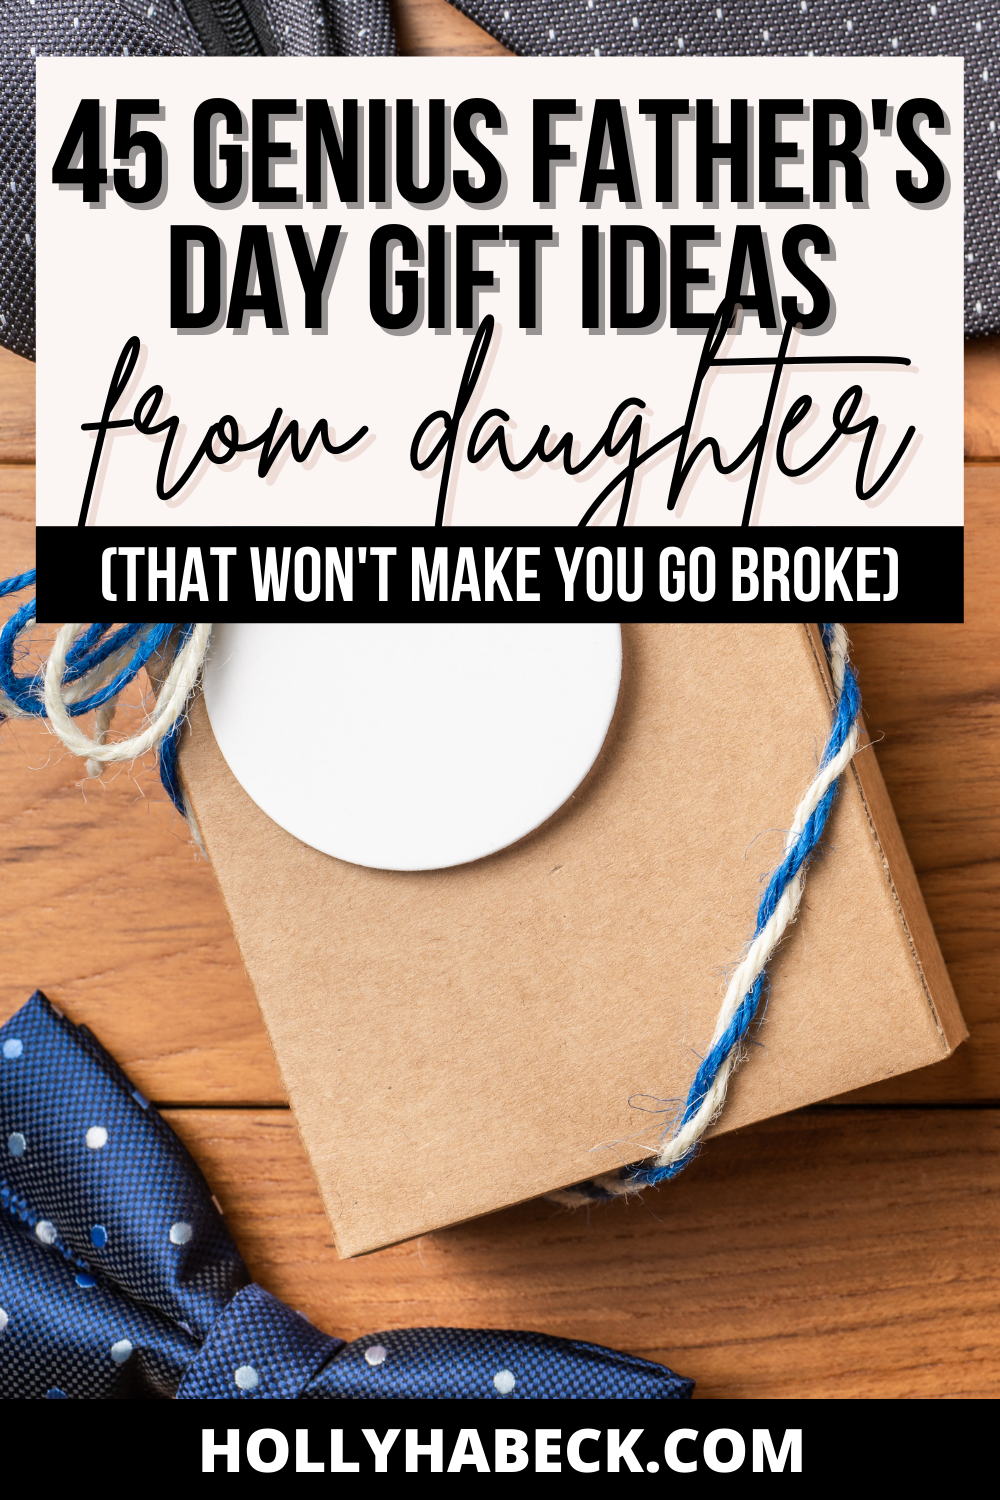 45 Genius Father's Day Gift Ideas From Daughter (That Won't Make You Go Broke)